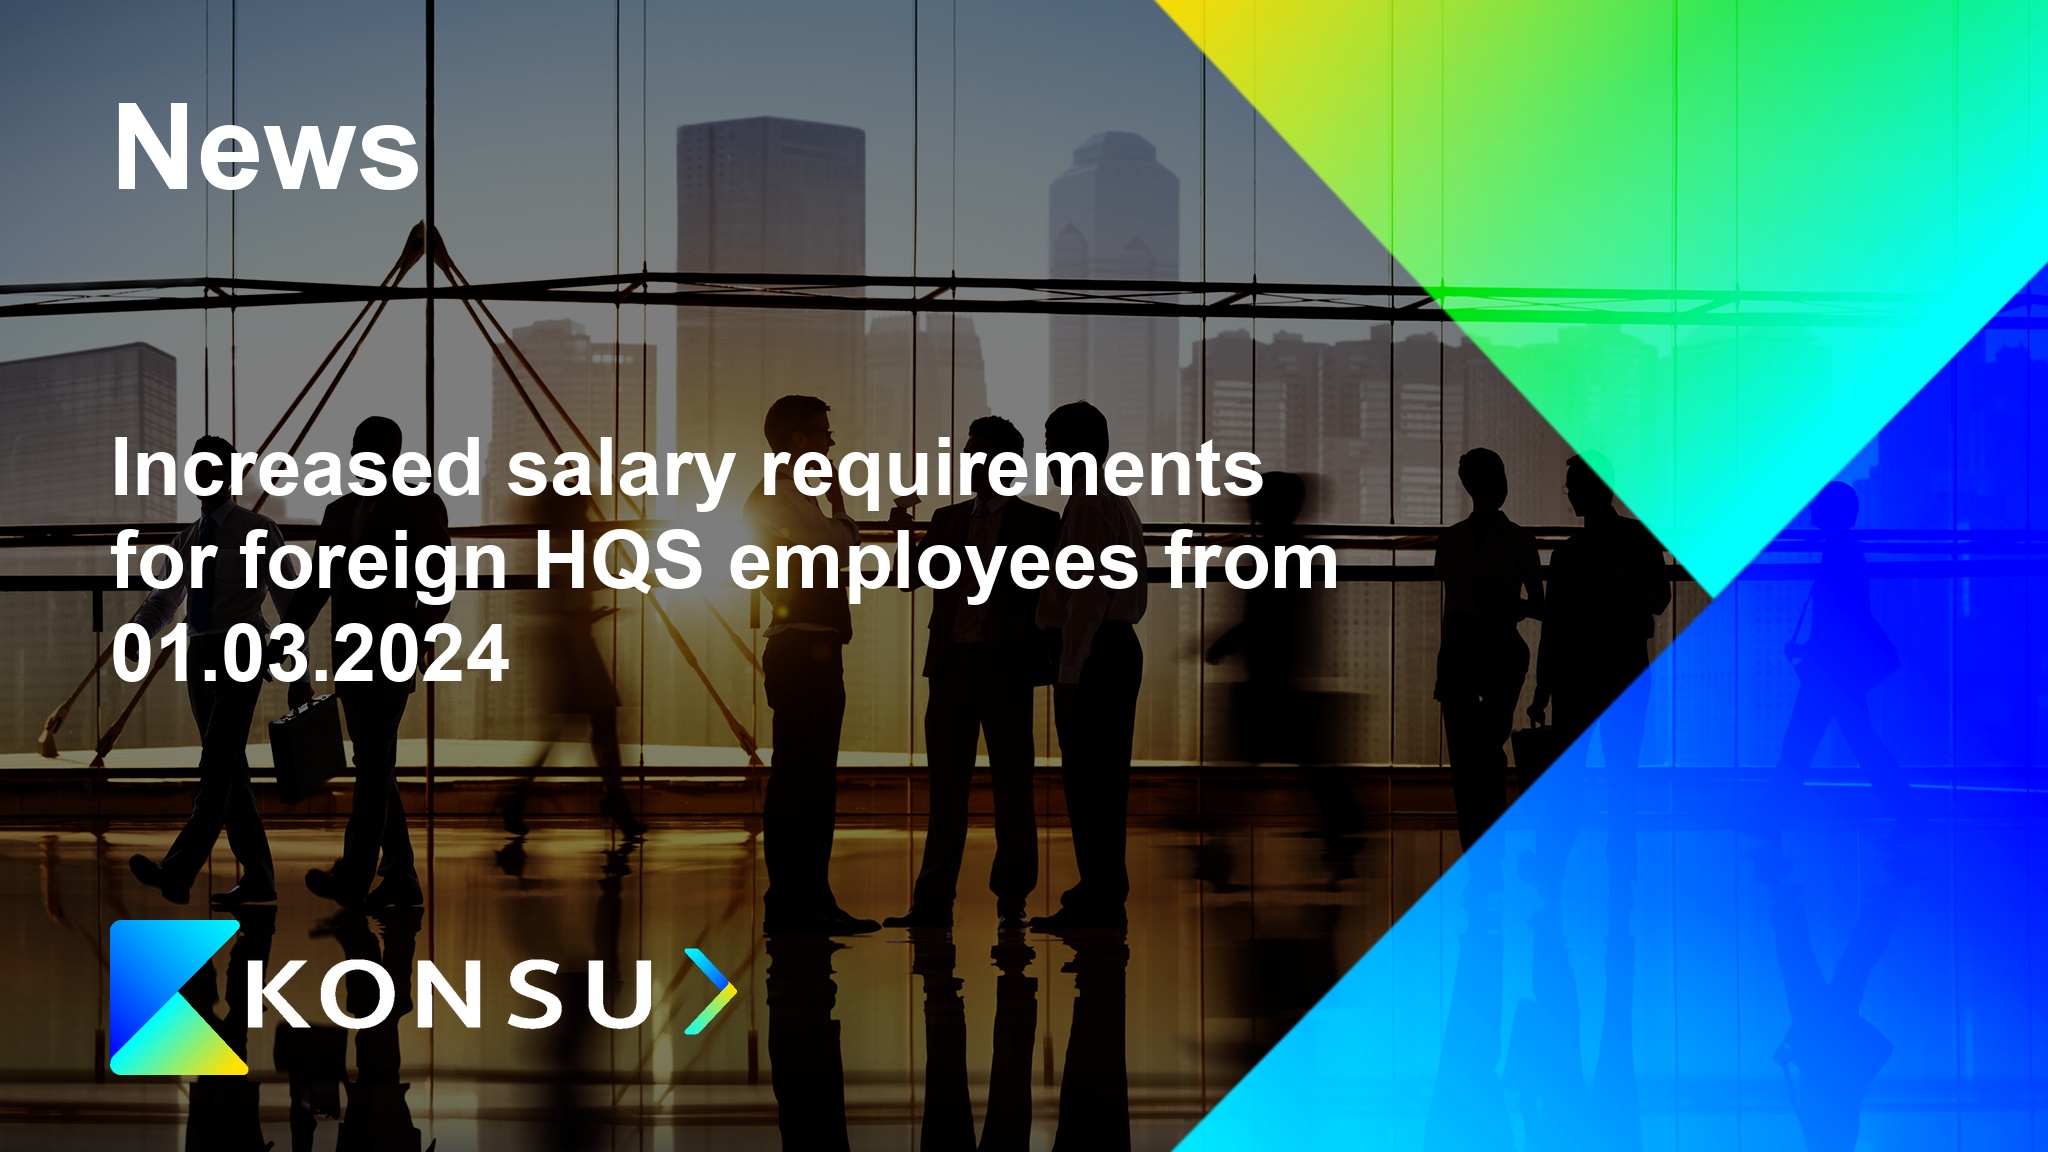 Increased salary requirements for foreign hqs employees en konsu